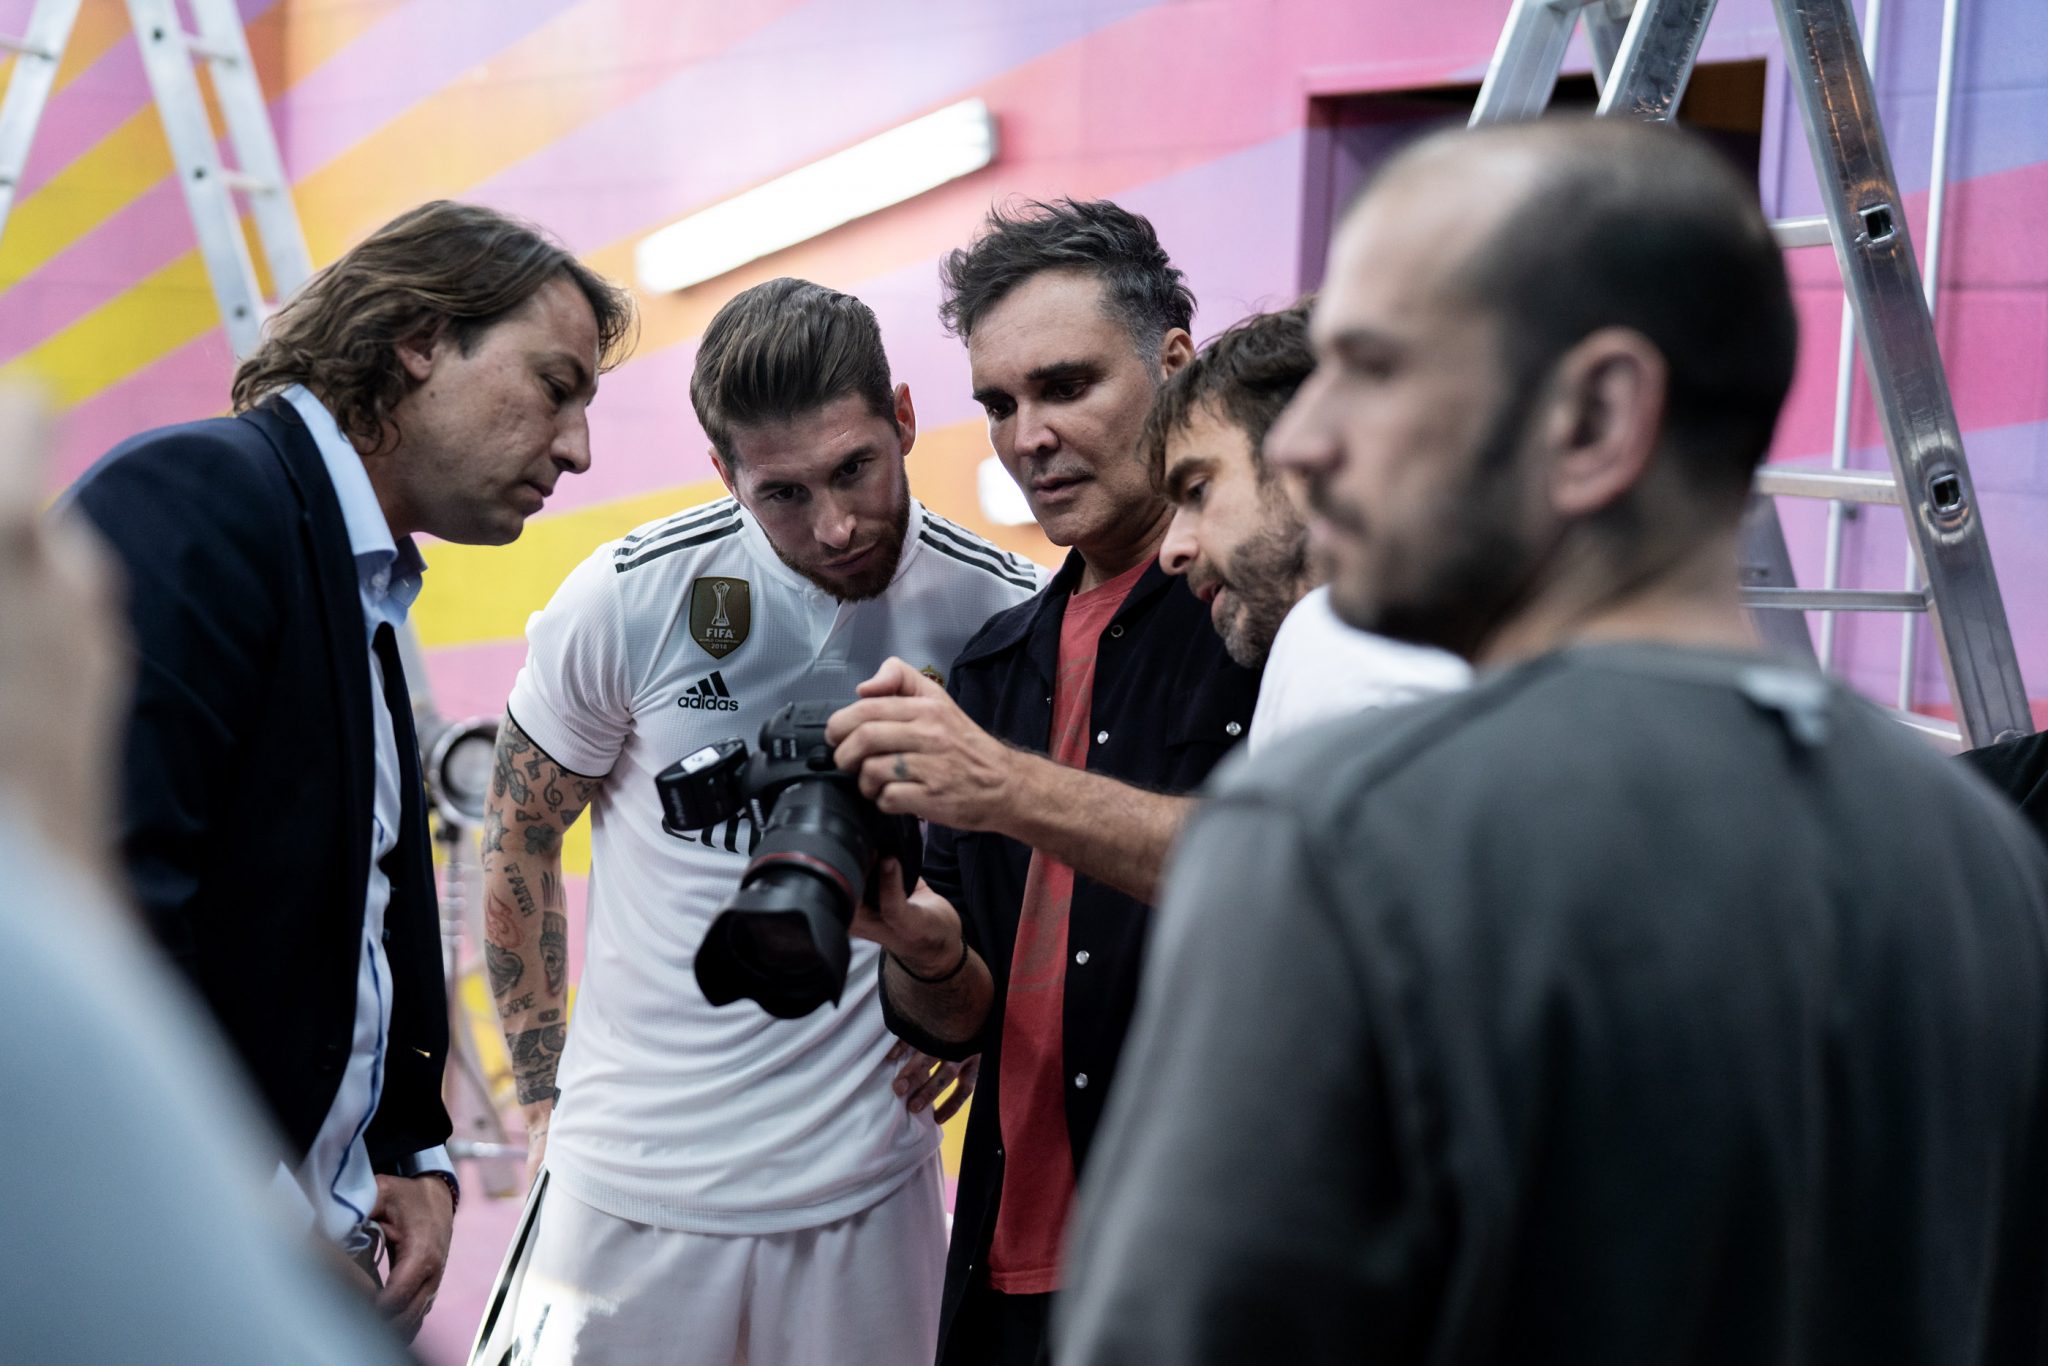 David LaChapelle | Audi x Real Madrid | Behind-the-scenes photographs from the Audi E-tron launch shoot in Madrid. | 21